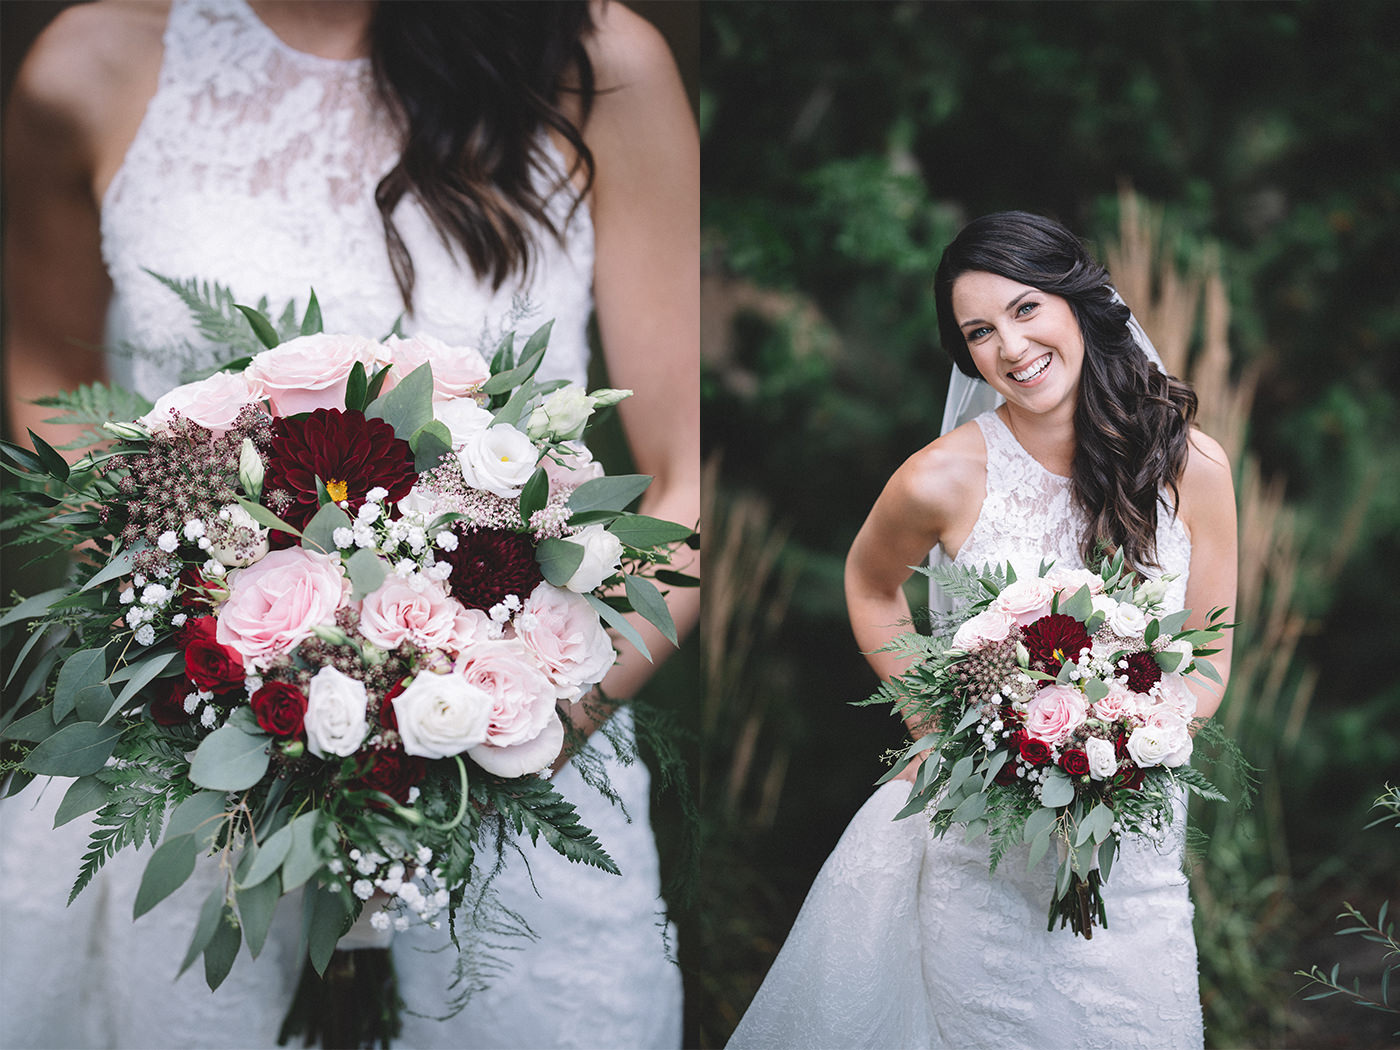 A bride has a big smile as she shows off her flowers